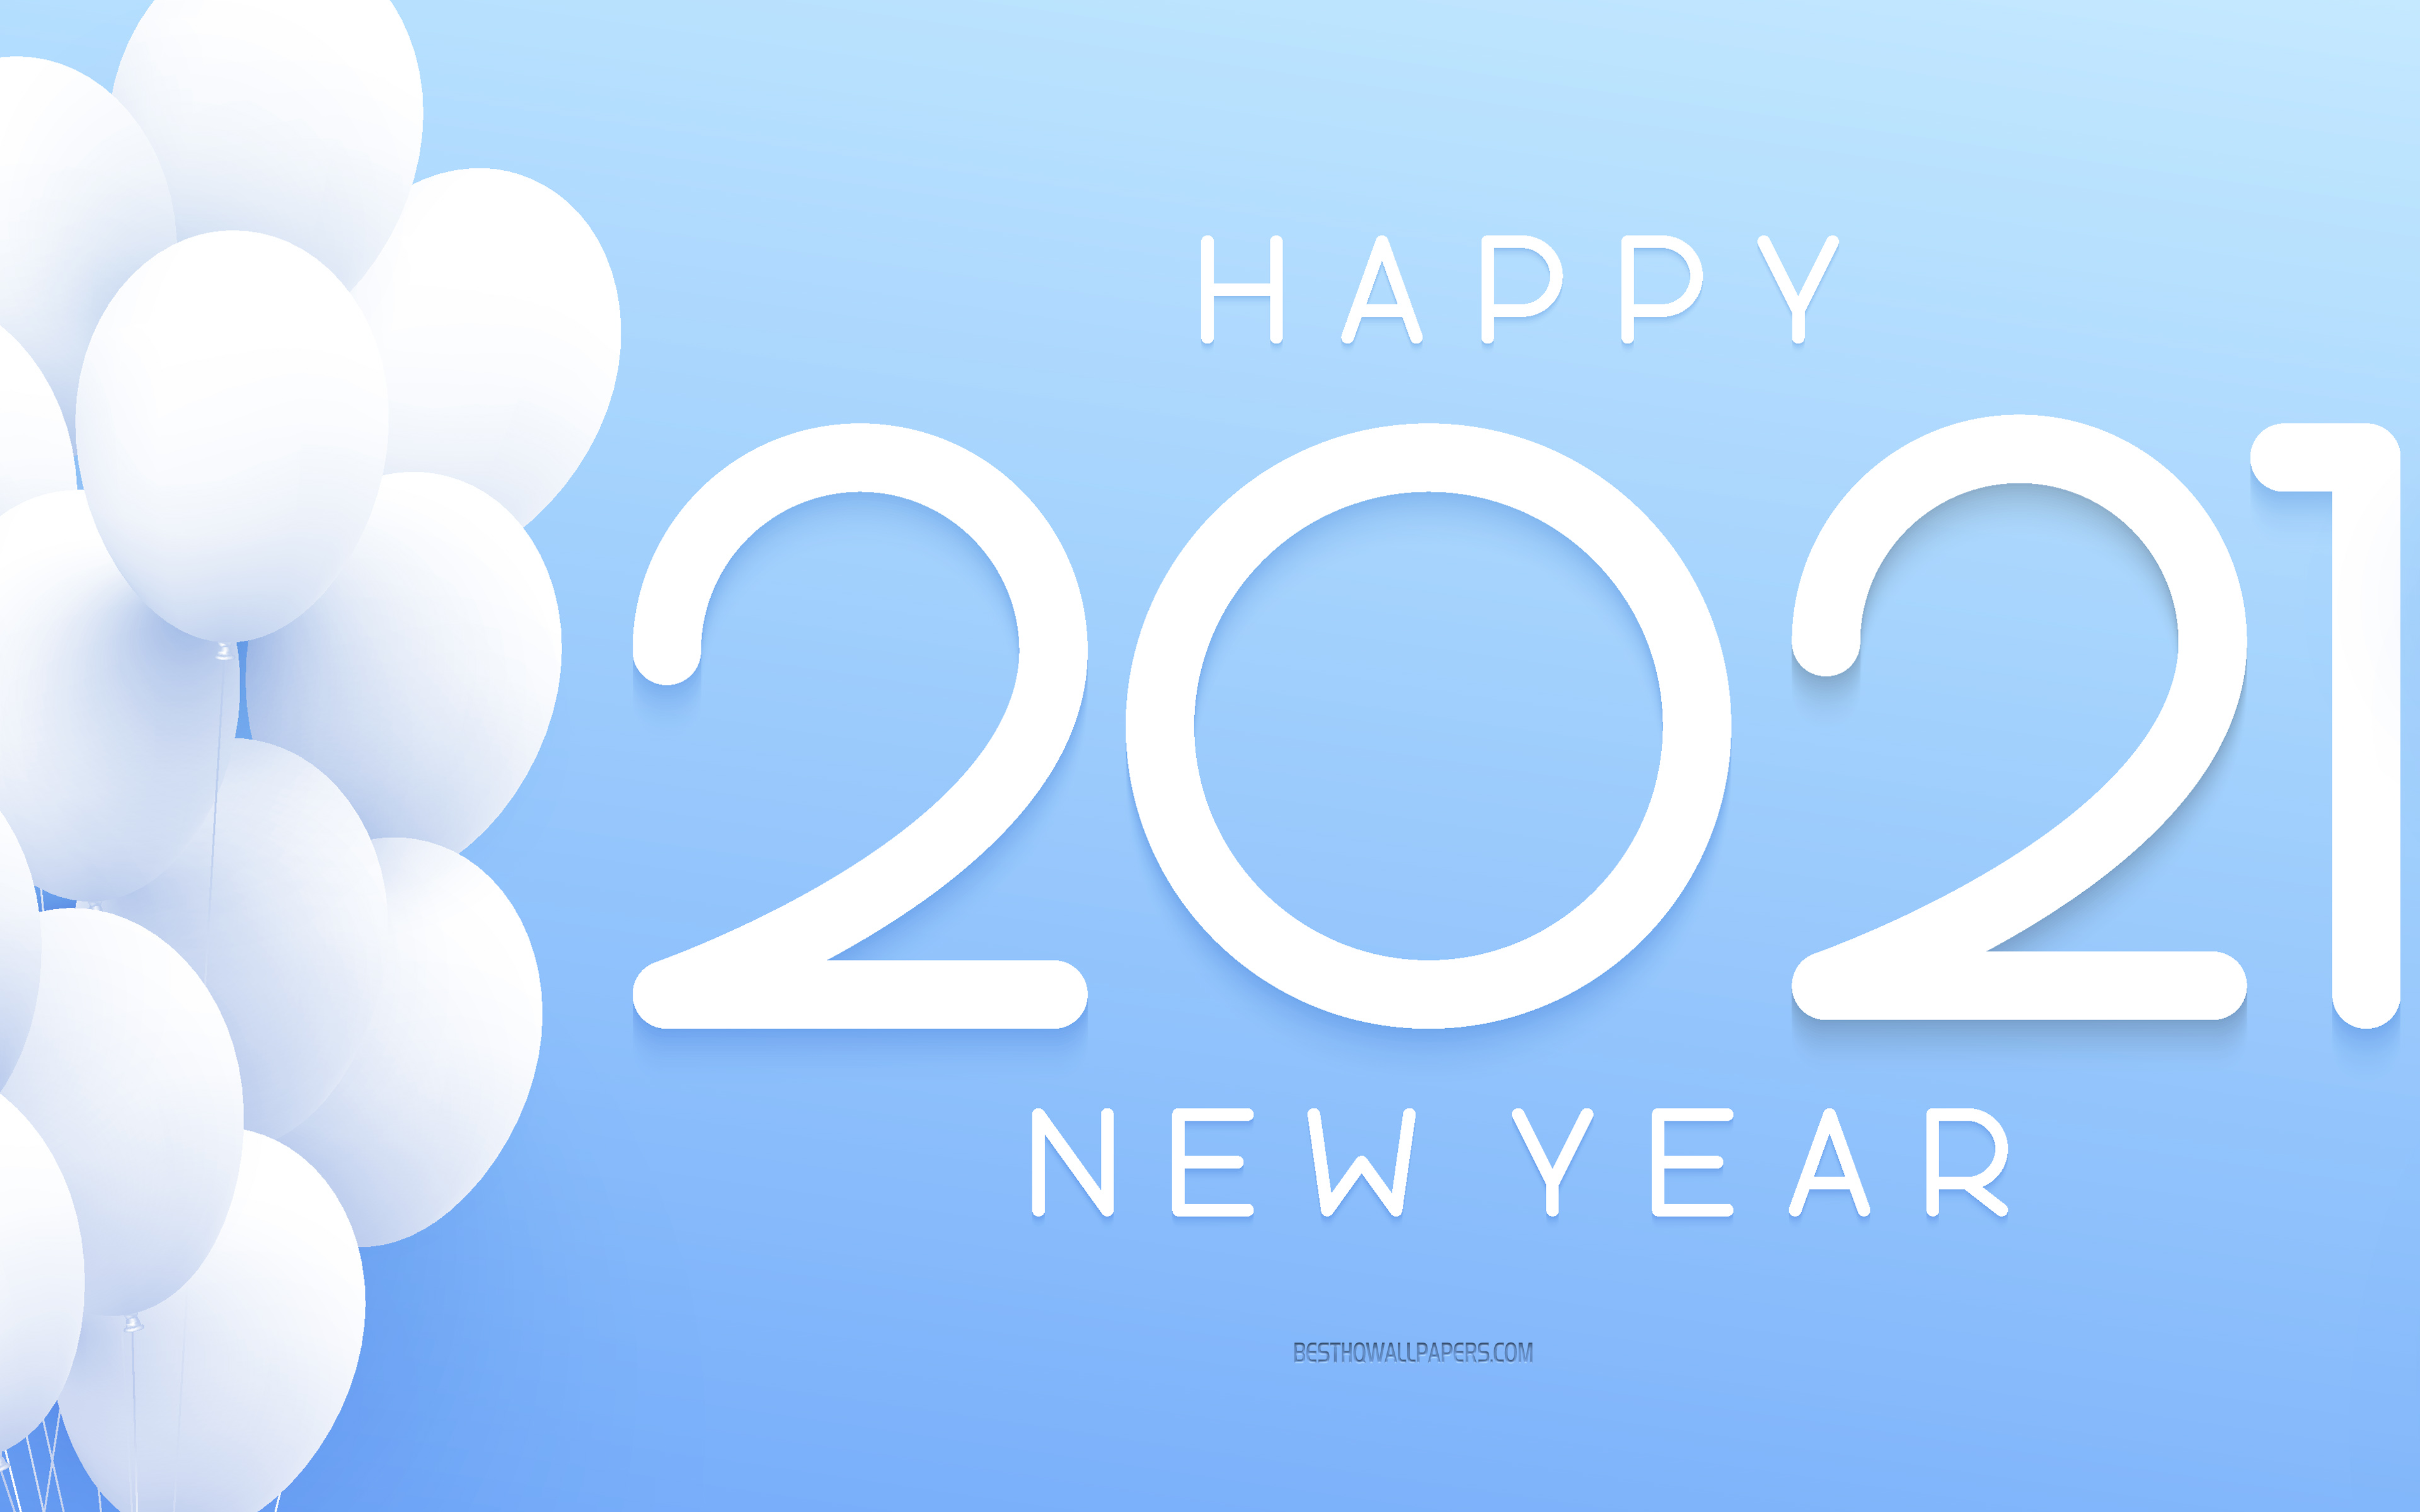 Download wallpapers 2021 New Year, white balloons, Happy New Year 2021,  blue 2021 background, 2021 concepts, 2021 Sky background for desktop with  resolution 3840x2400. High Quality HD pictures wallpapers